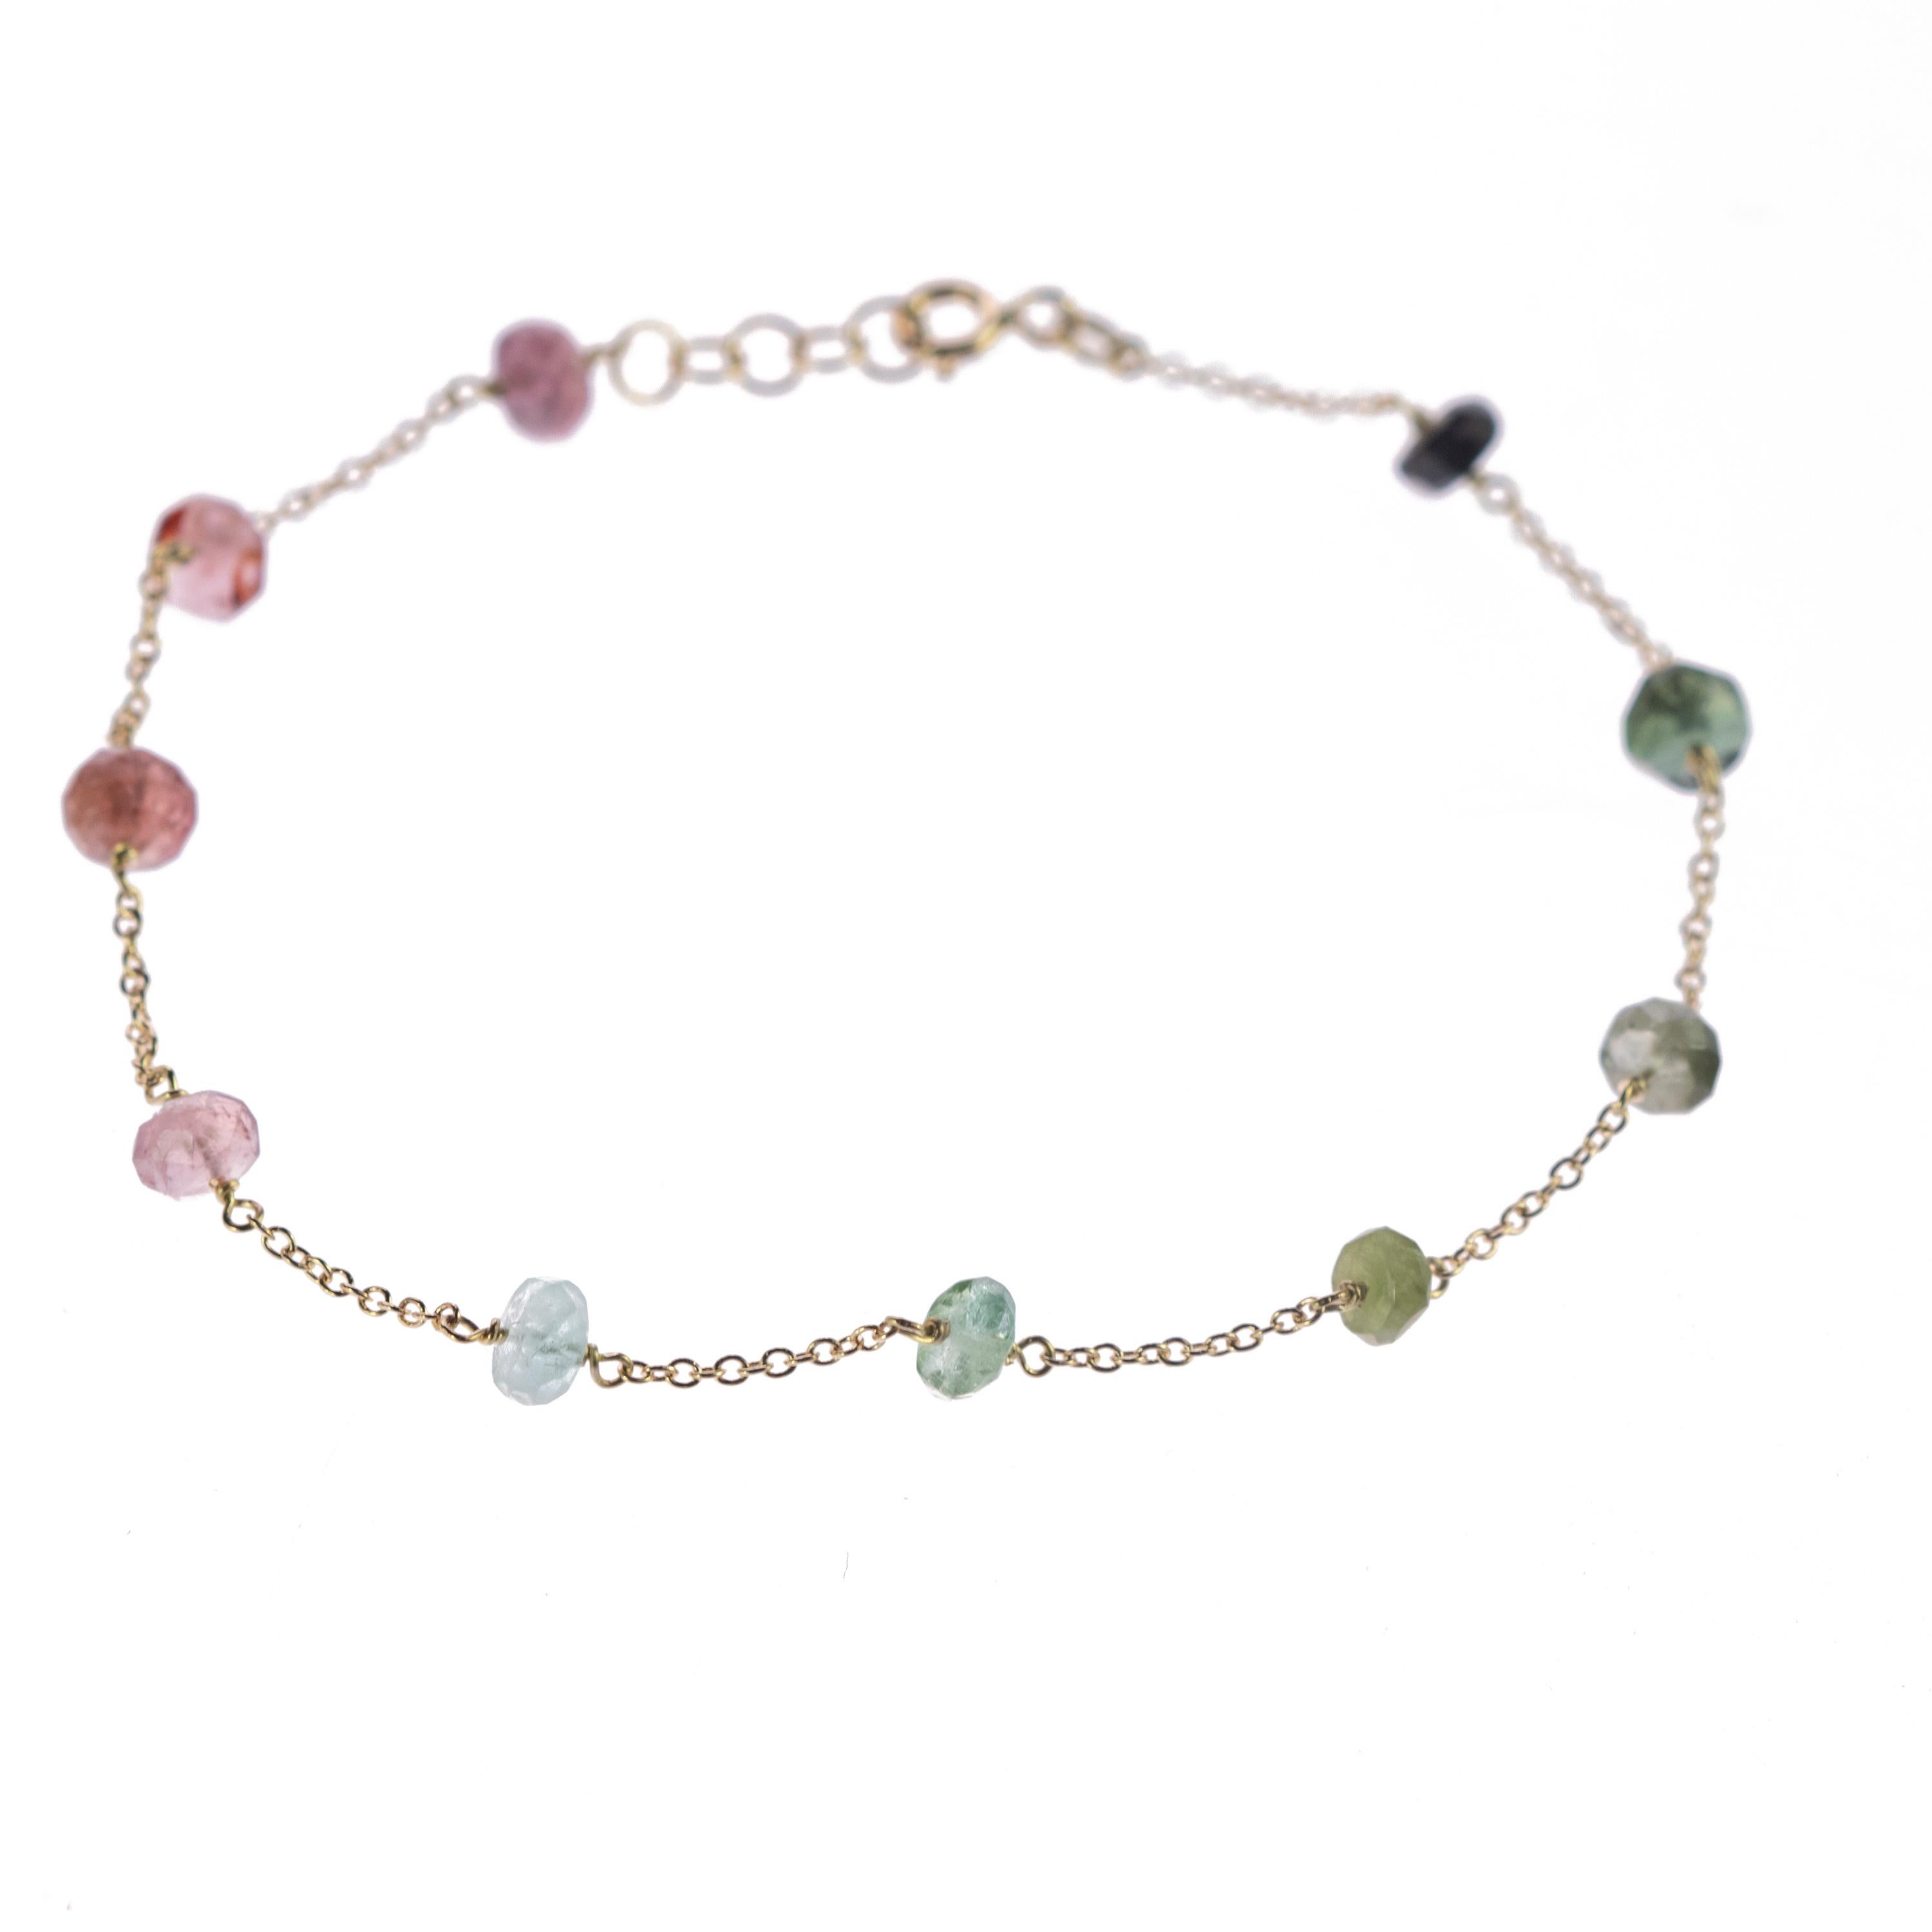 Intini Jewels signature quality on a modern and contemporary design jewel. Ten gems of top quality of tourmaline embellish a delicate 18 karat yellow gold chain bracelet. A jewel full of color and pasion. 

Ancient beliefs say that we should always